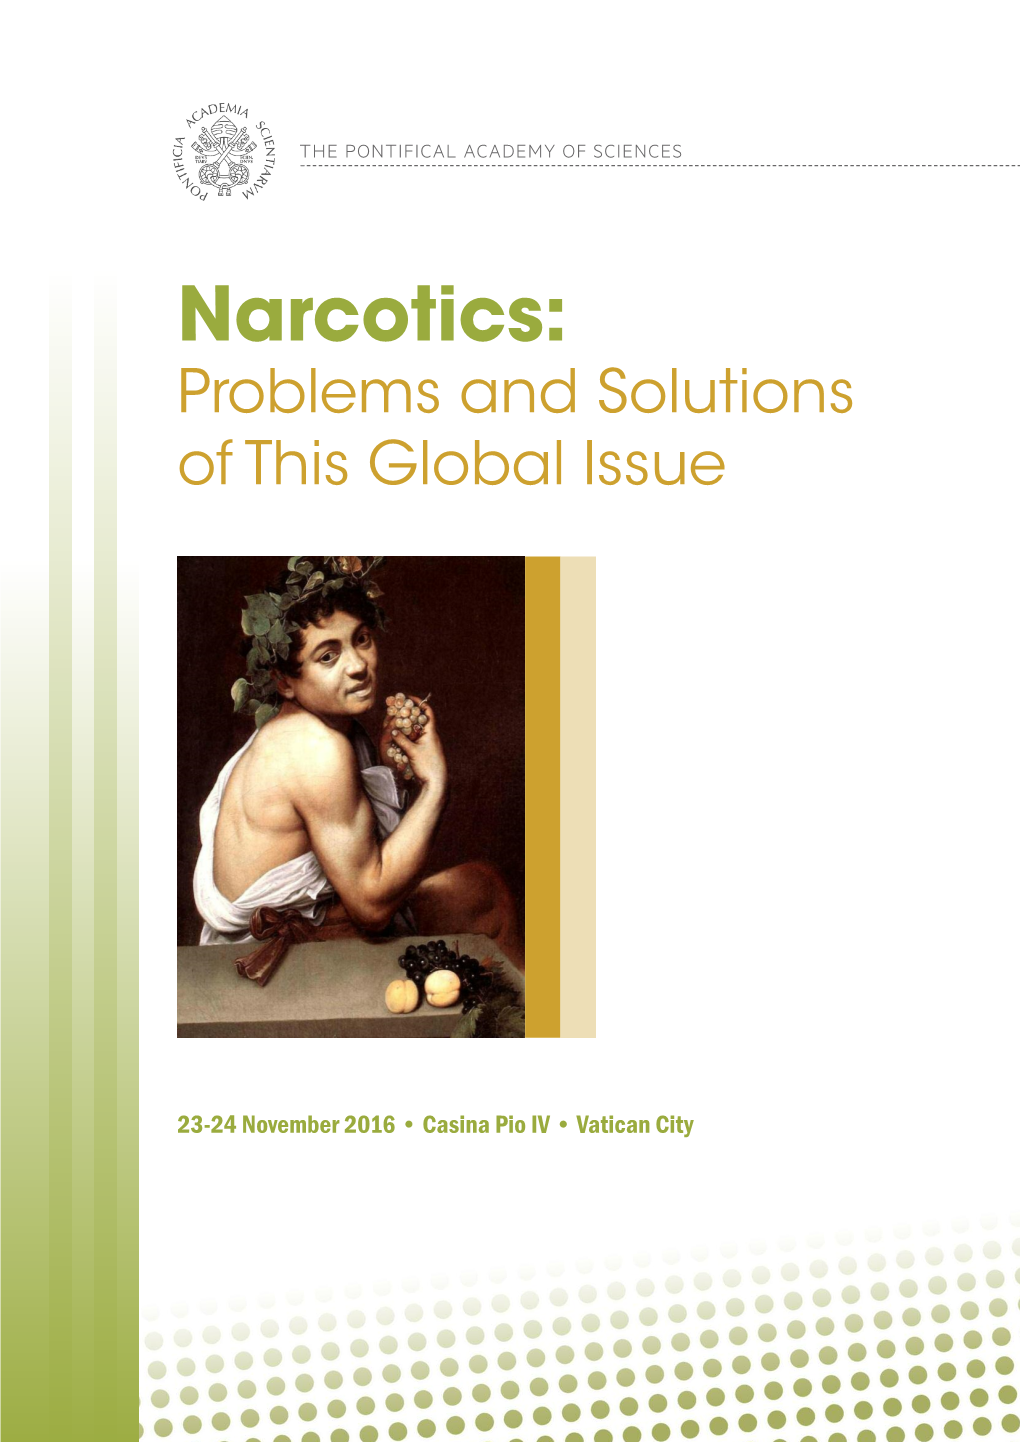 Narcotics: Problems and Solutions of This Global Issue